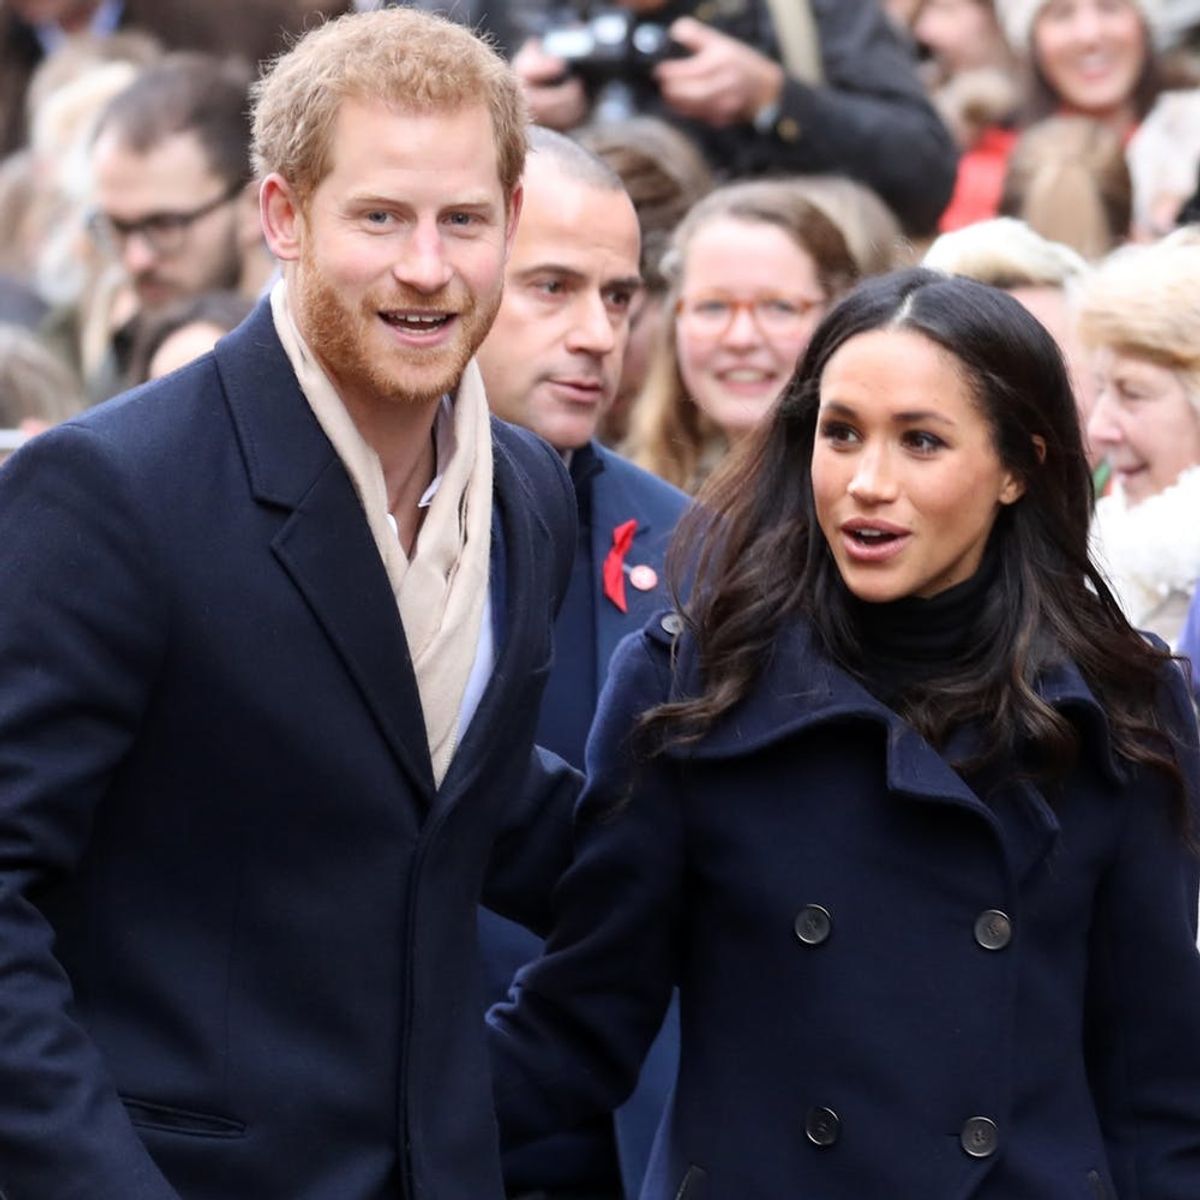 Meghan Markle Joins Prince Harry for Their First Official Royal Engagement